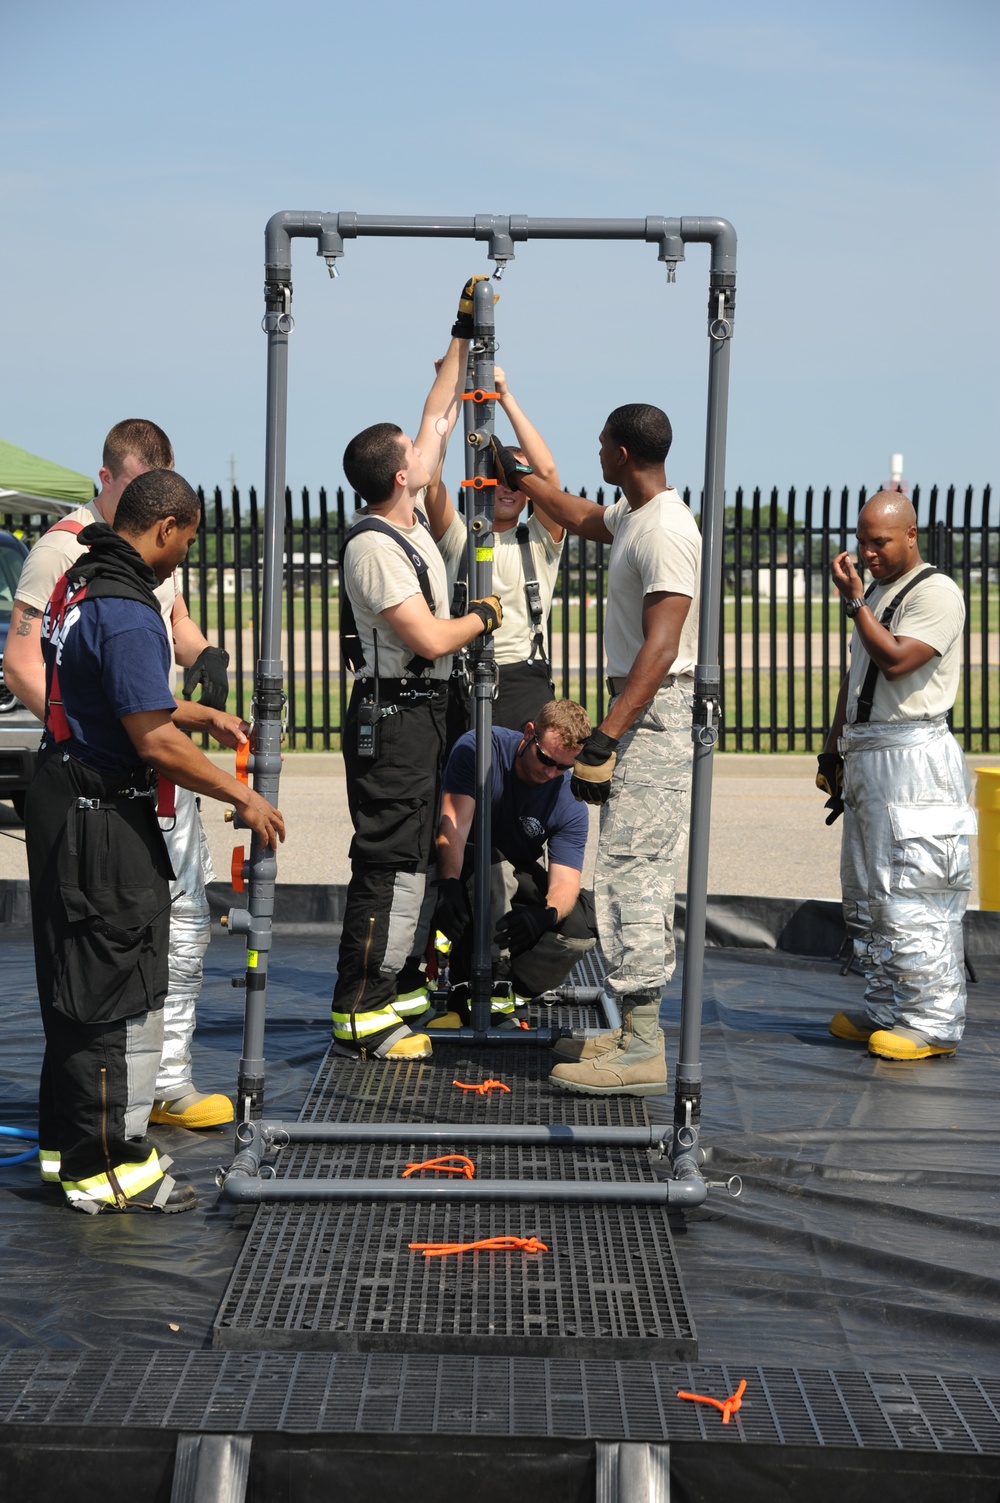 Exercise at Keesler Air Force Base